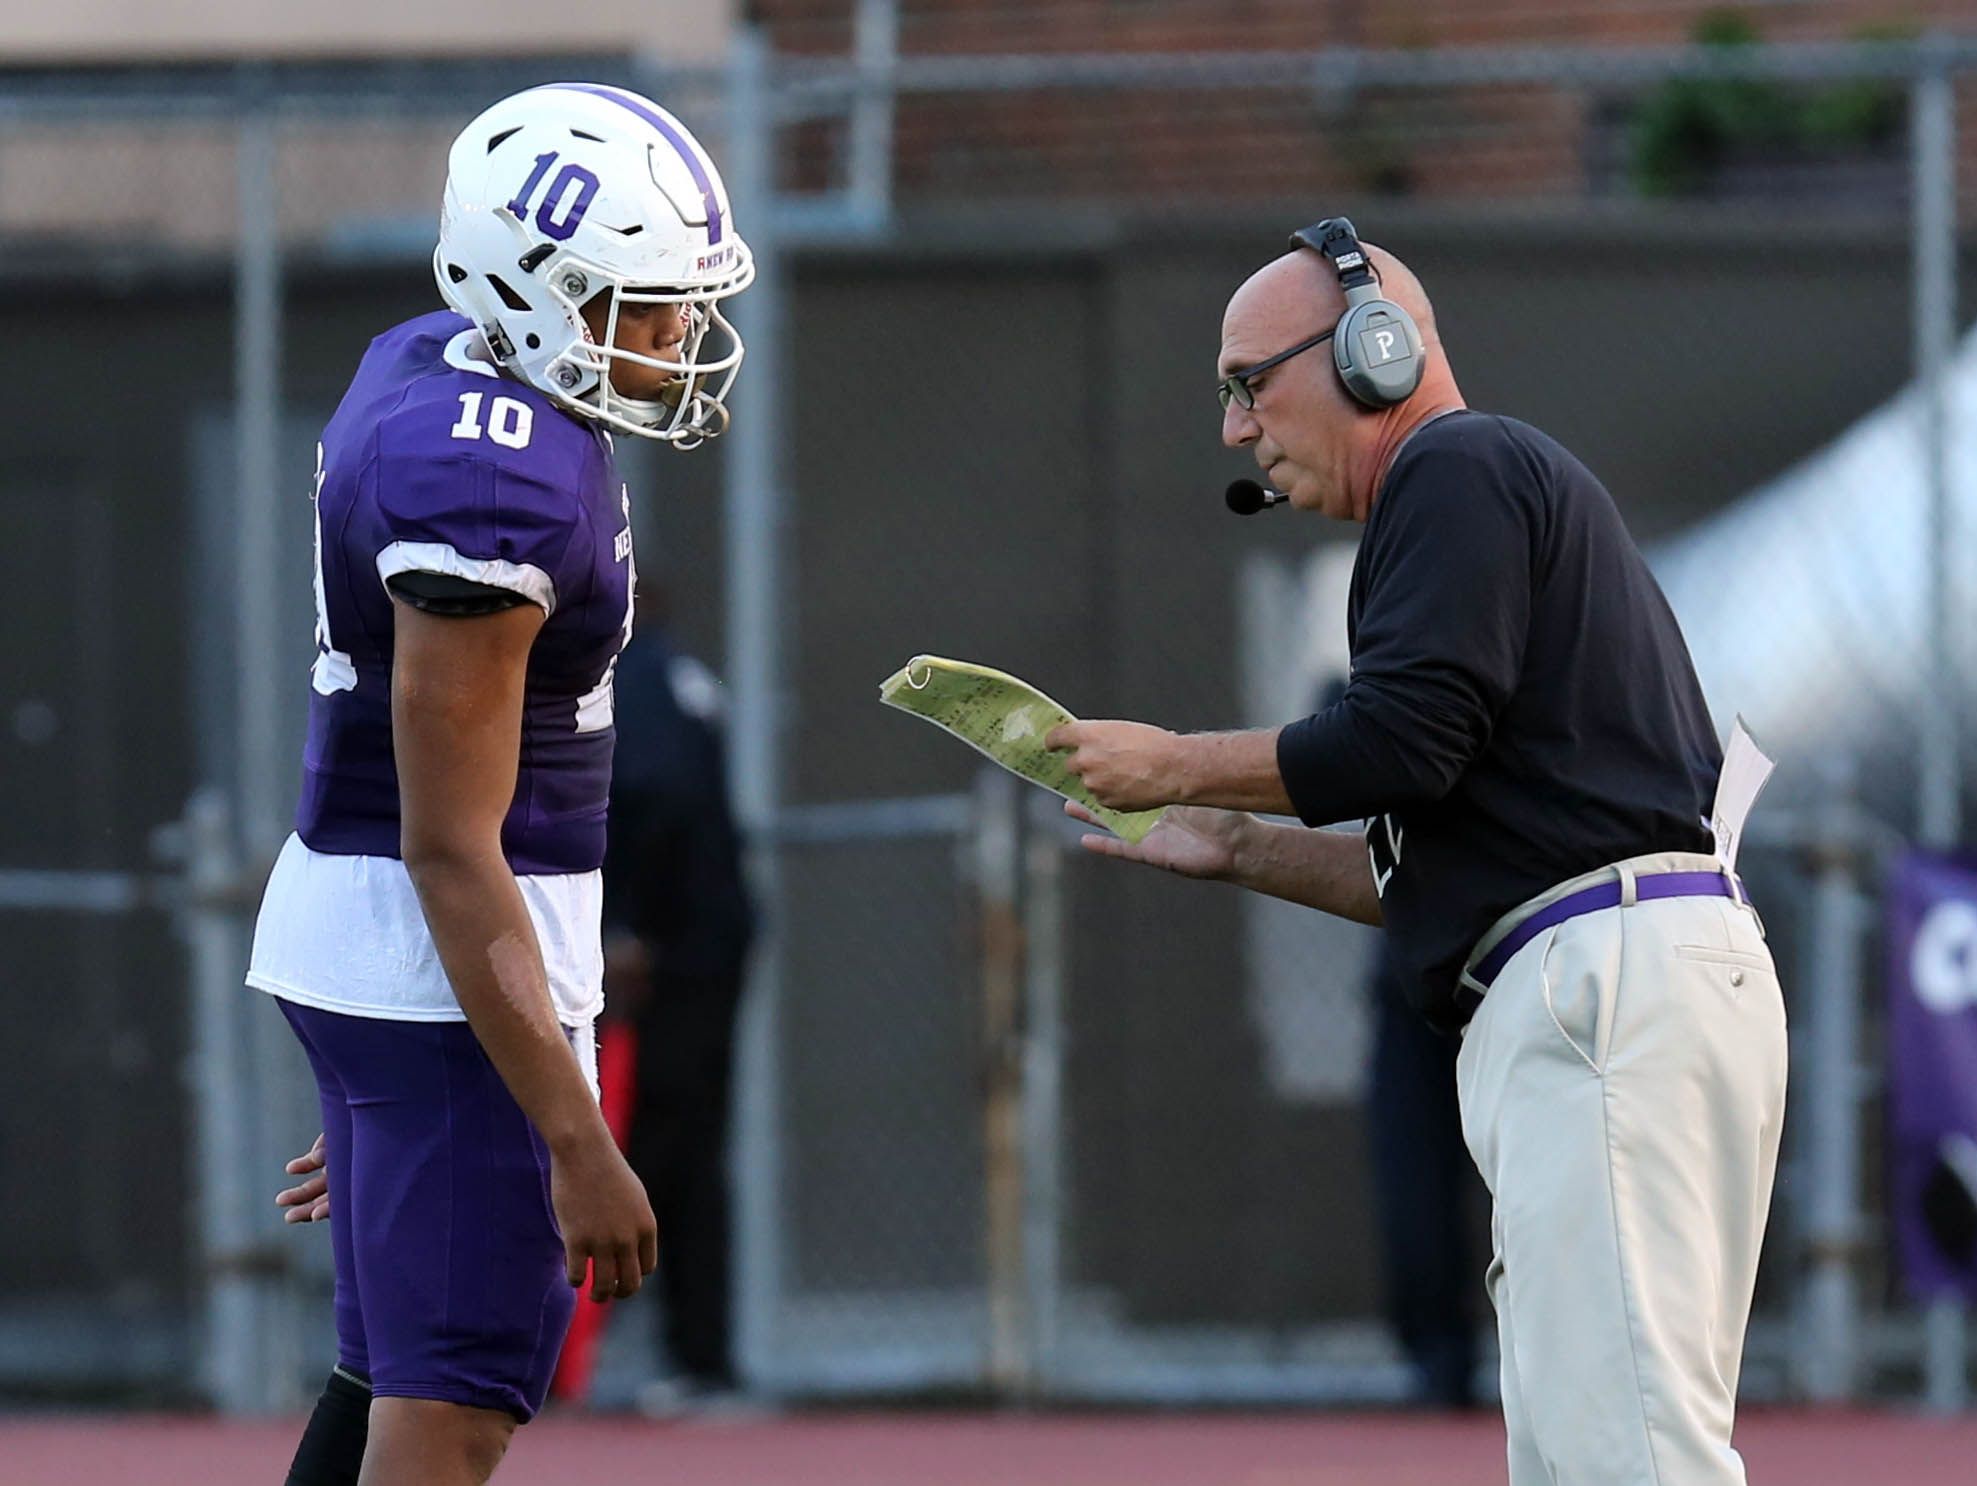 New Rochelle defeated Carmel 6-0 in a Class AA quarterfinal at New Rochelle High School Friday night.